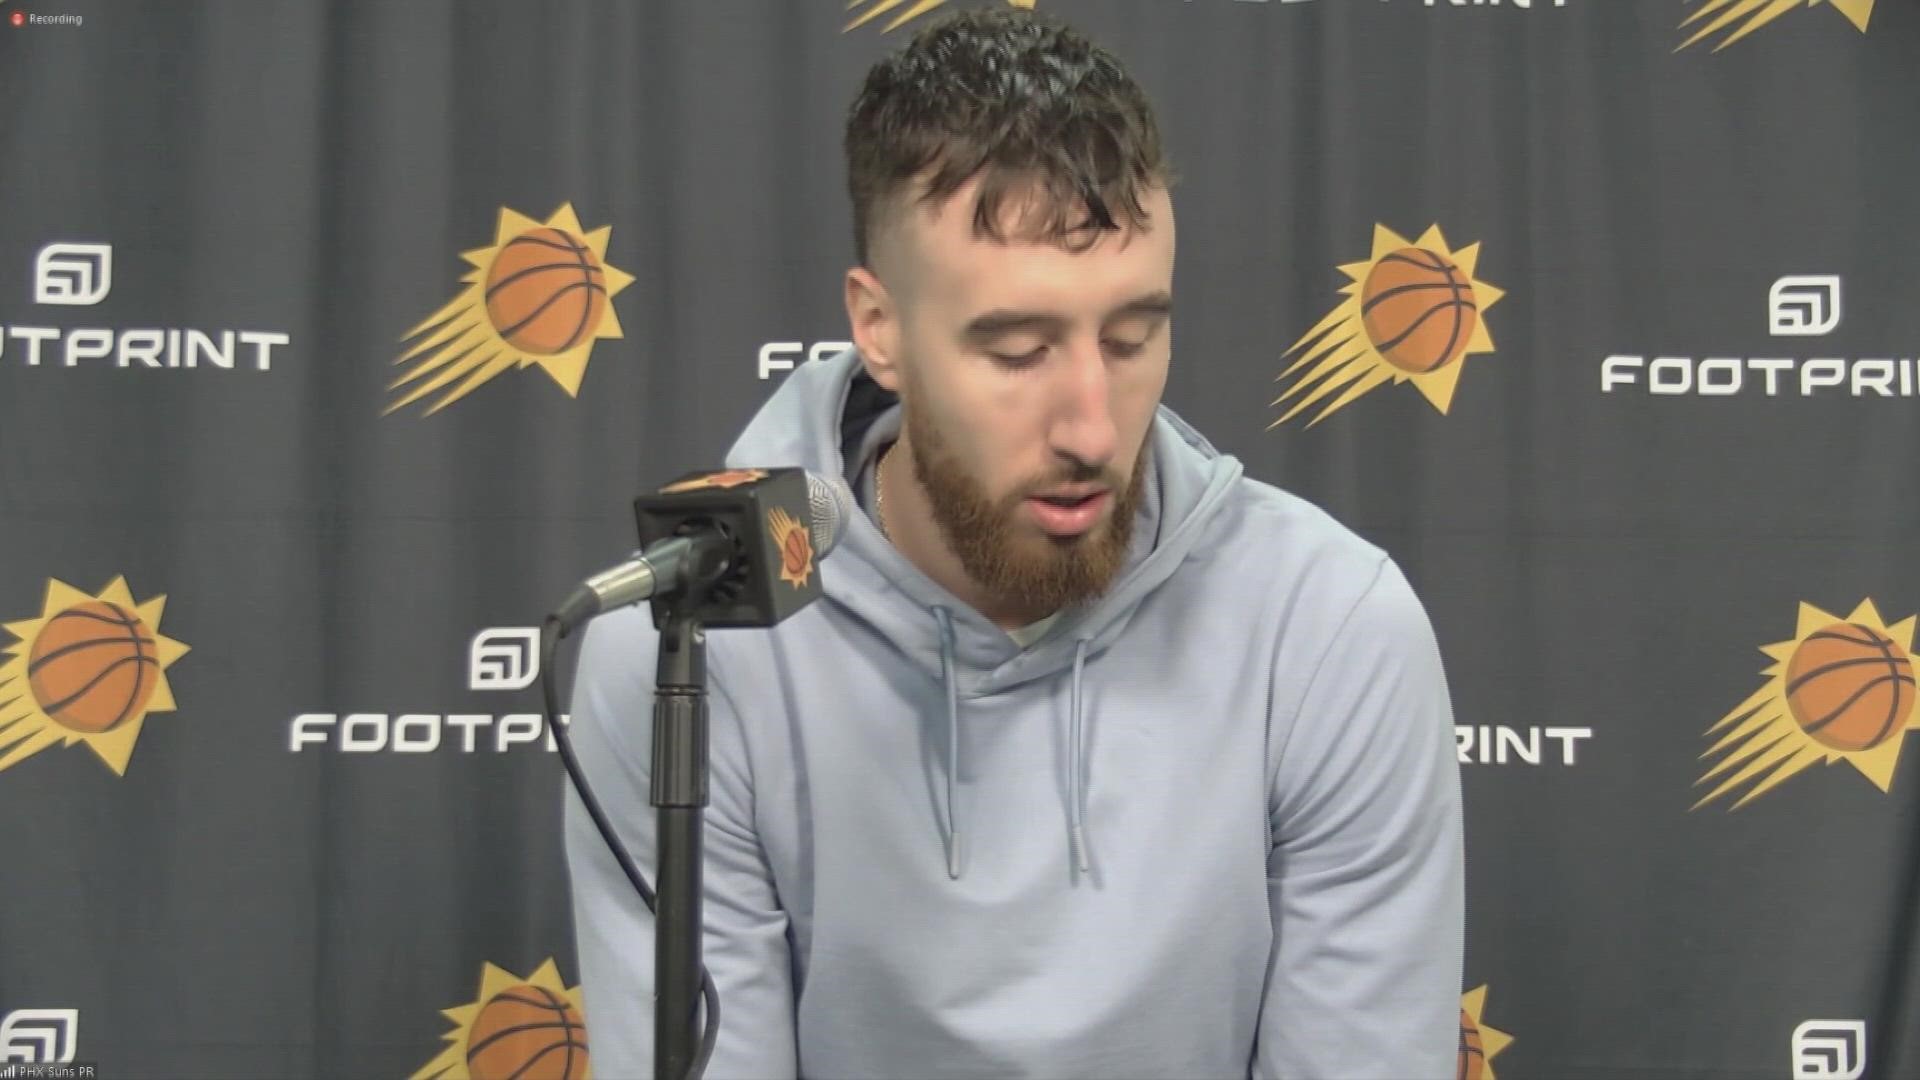 Kaminsky gets emotional about his NBA journey while talking about his career night, where he scored 31 points in a win over the Portland Trail Blazers